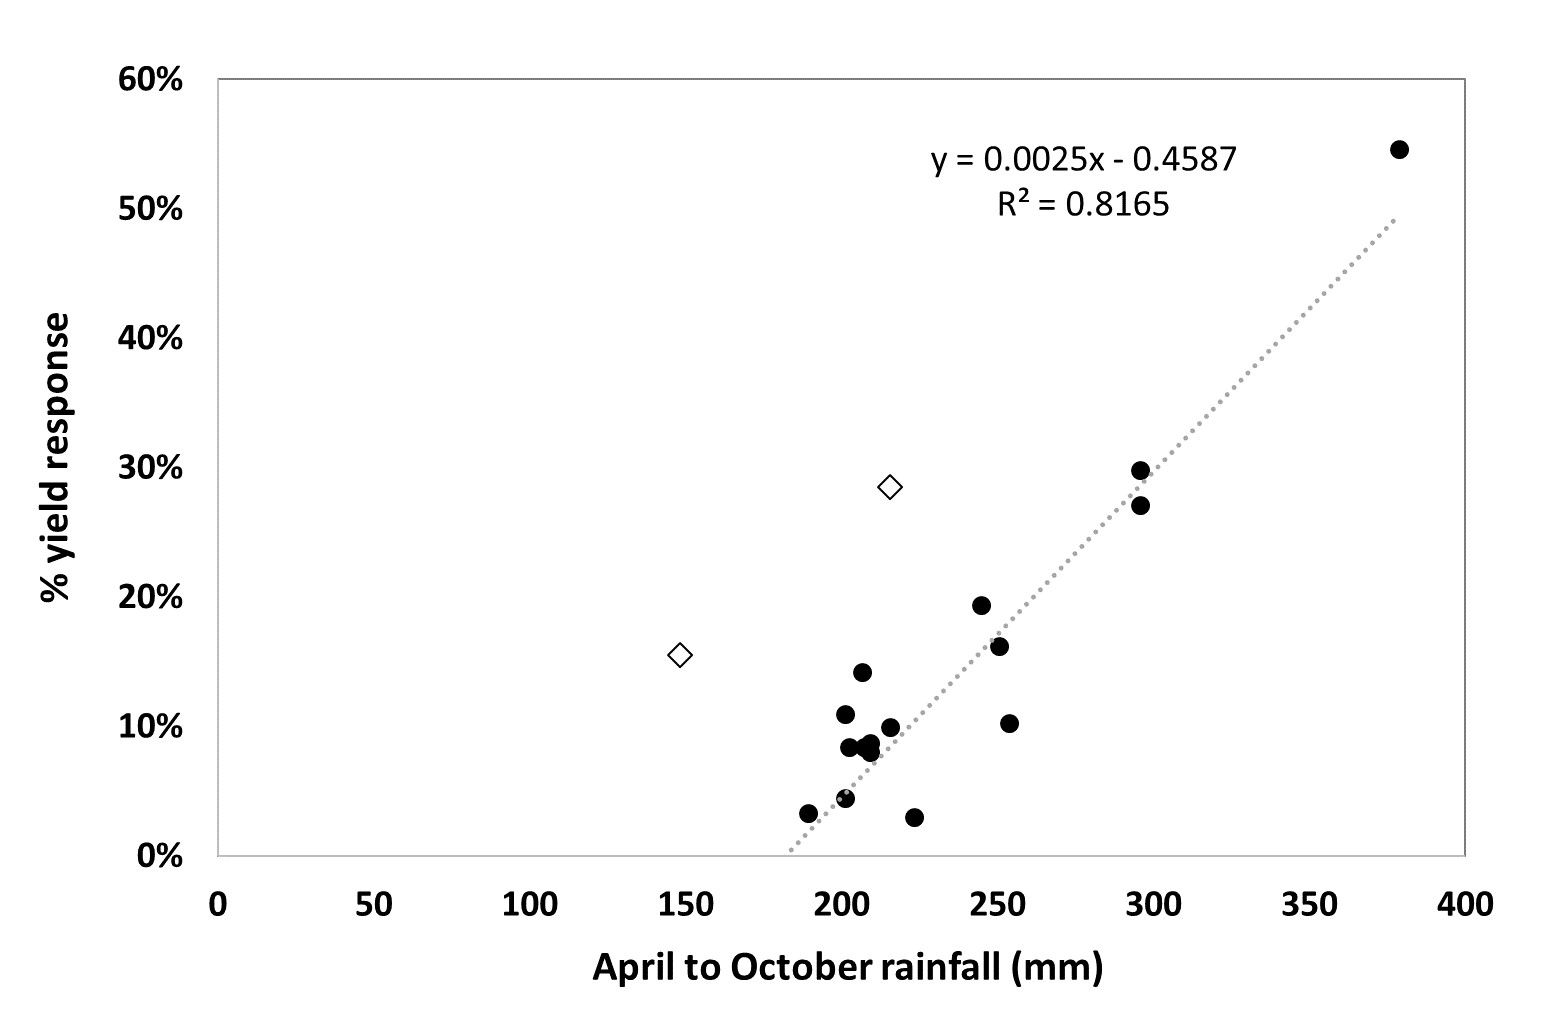 Figure 3. Percentage yield responses in wheat field experiments between 2011 and 2015 treated with dual streams of Uniform® fungicide at 200mL/ha above and below the seed to control rhizoctonia root rot in medium to high risk paddocks versus April to October rainfall; *Low summer rainfall <>High summer rainfall.